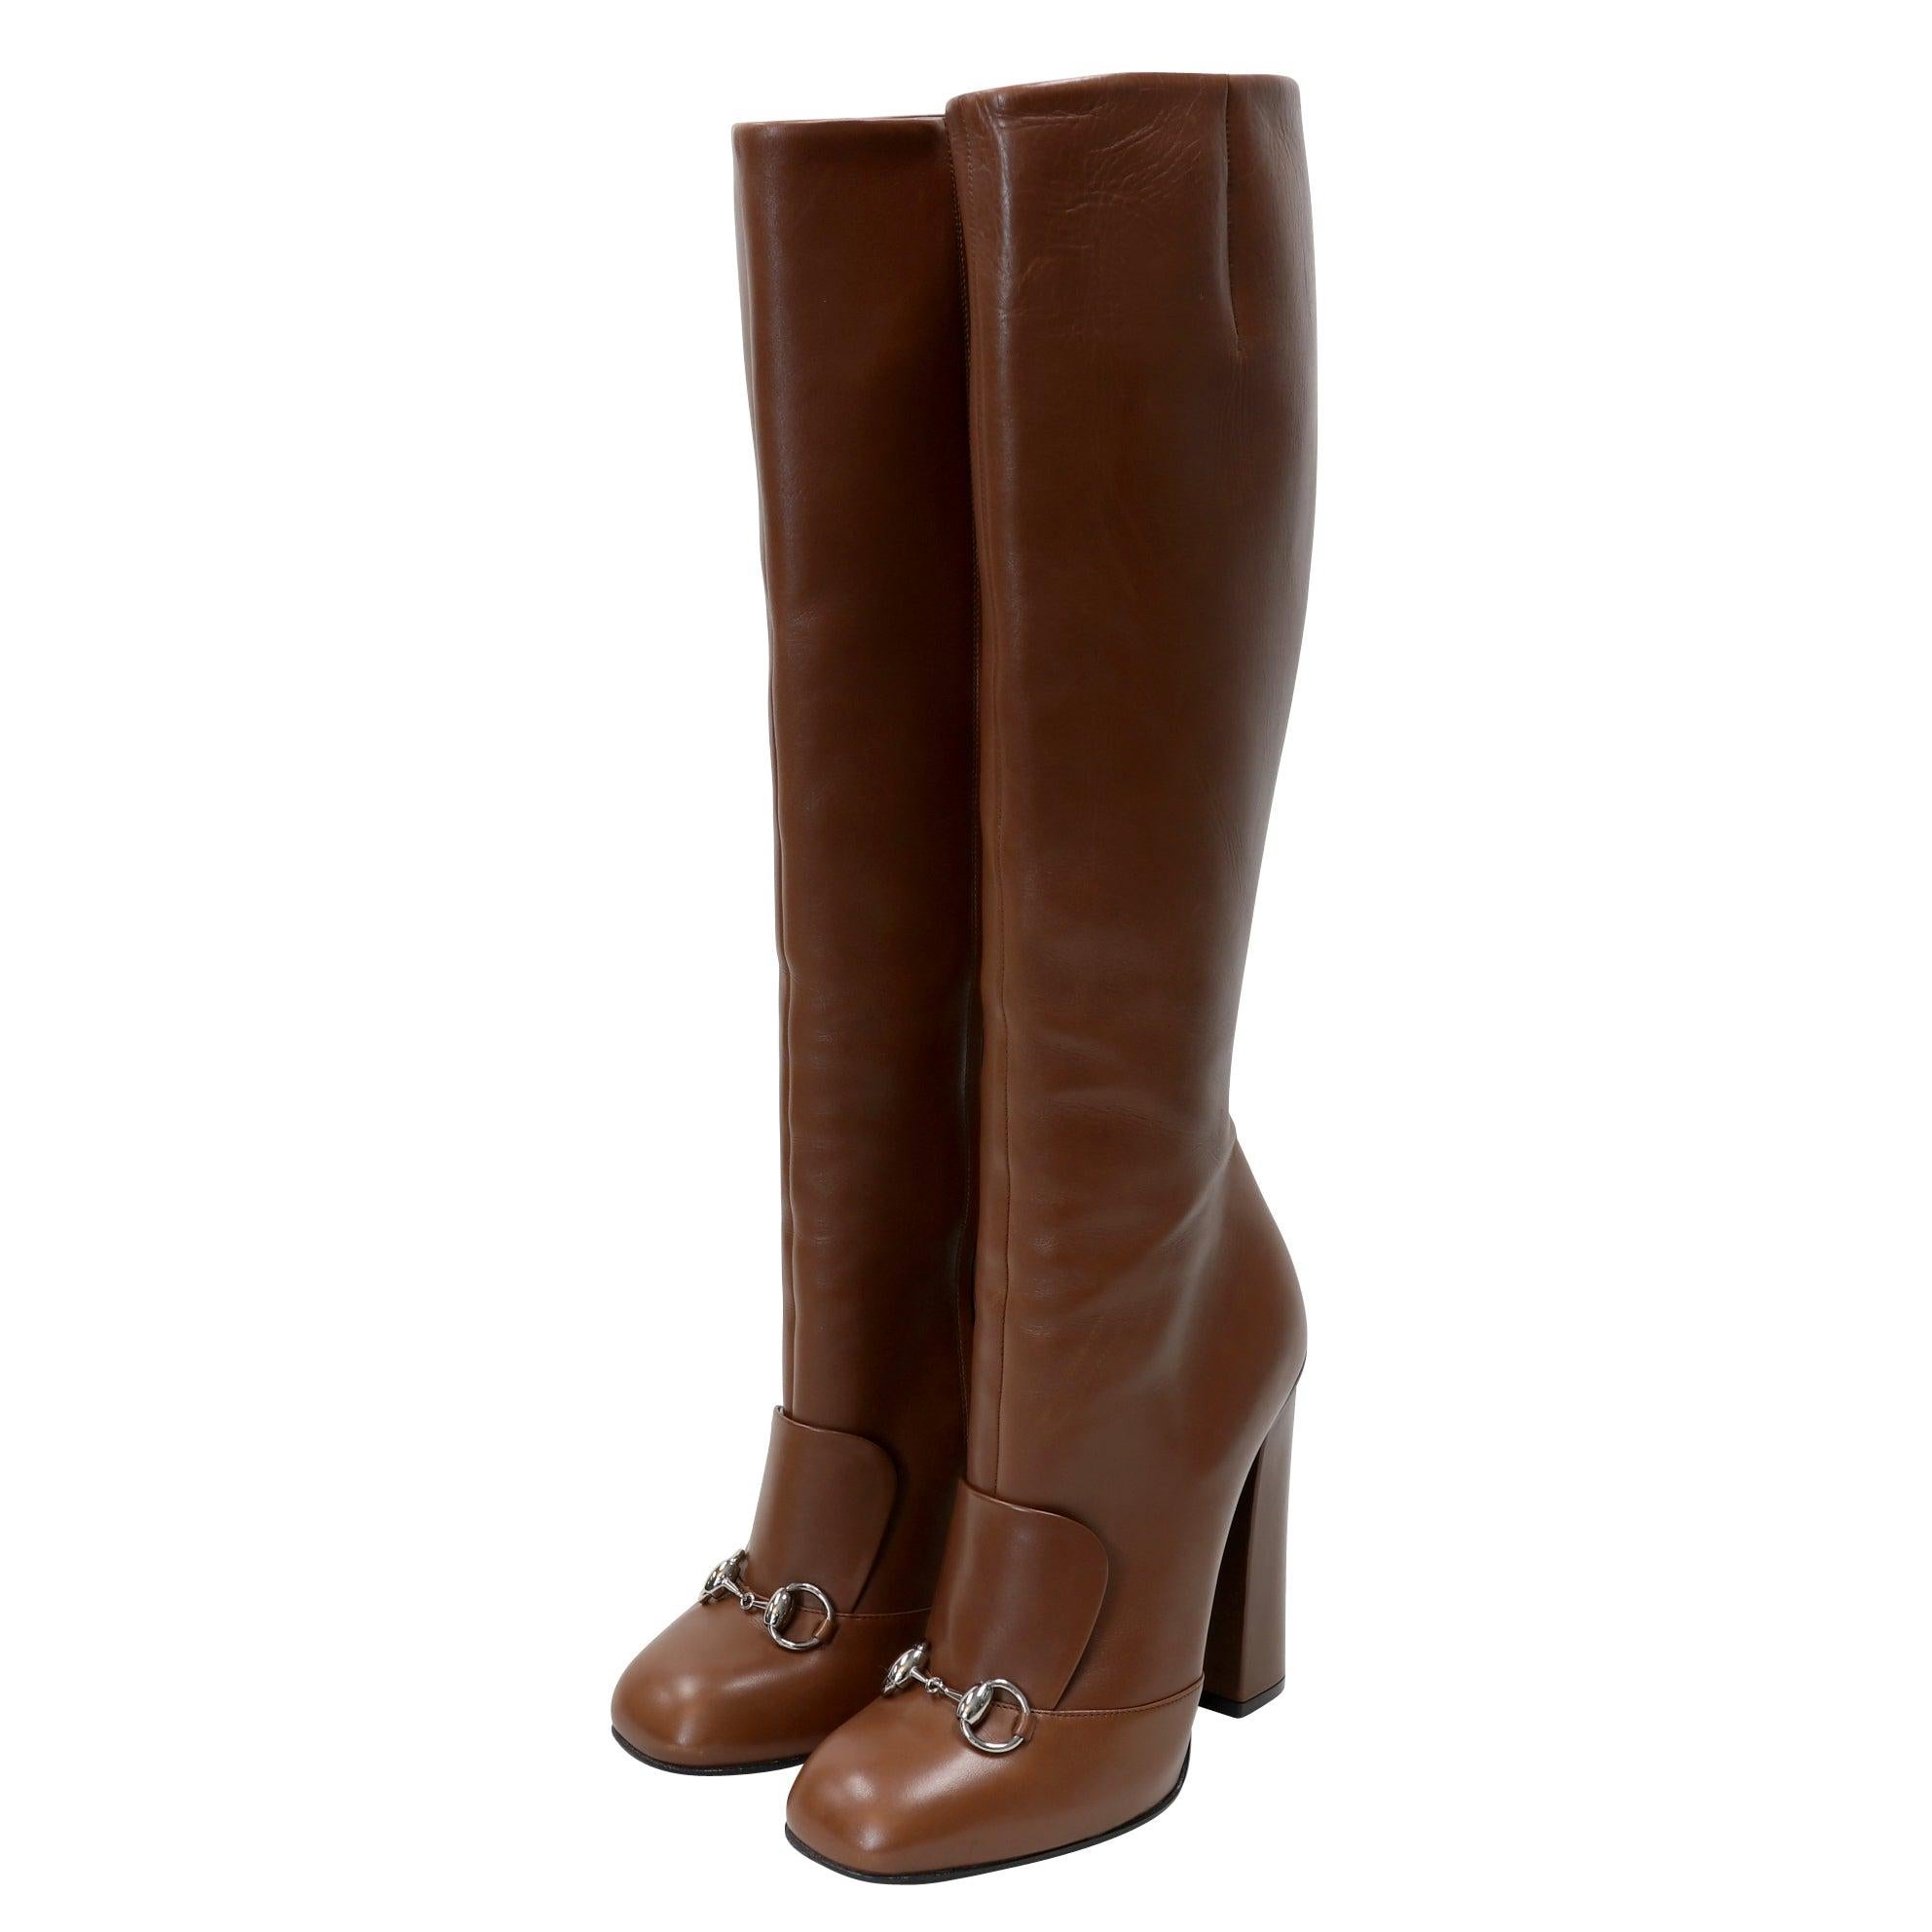 Women's Gucci Brown Leather Horsebit Knee High Riding Boots 39.5 GG-S1111P-0001 For Sale